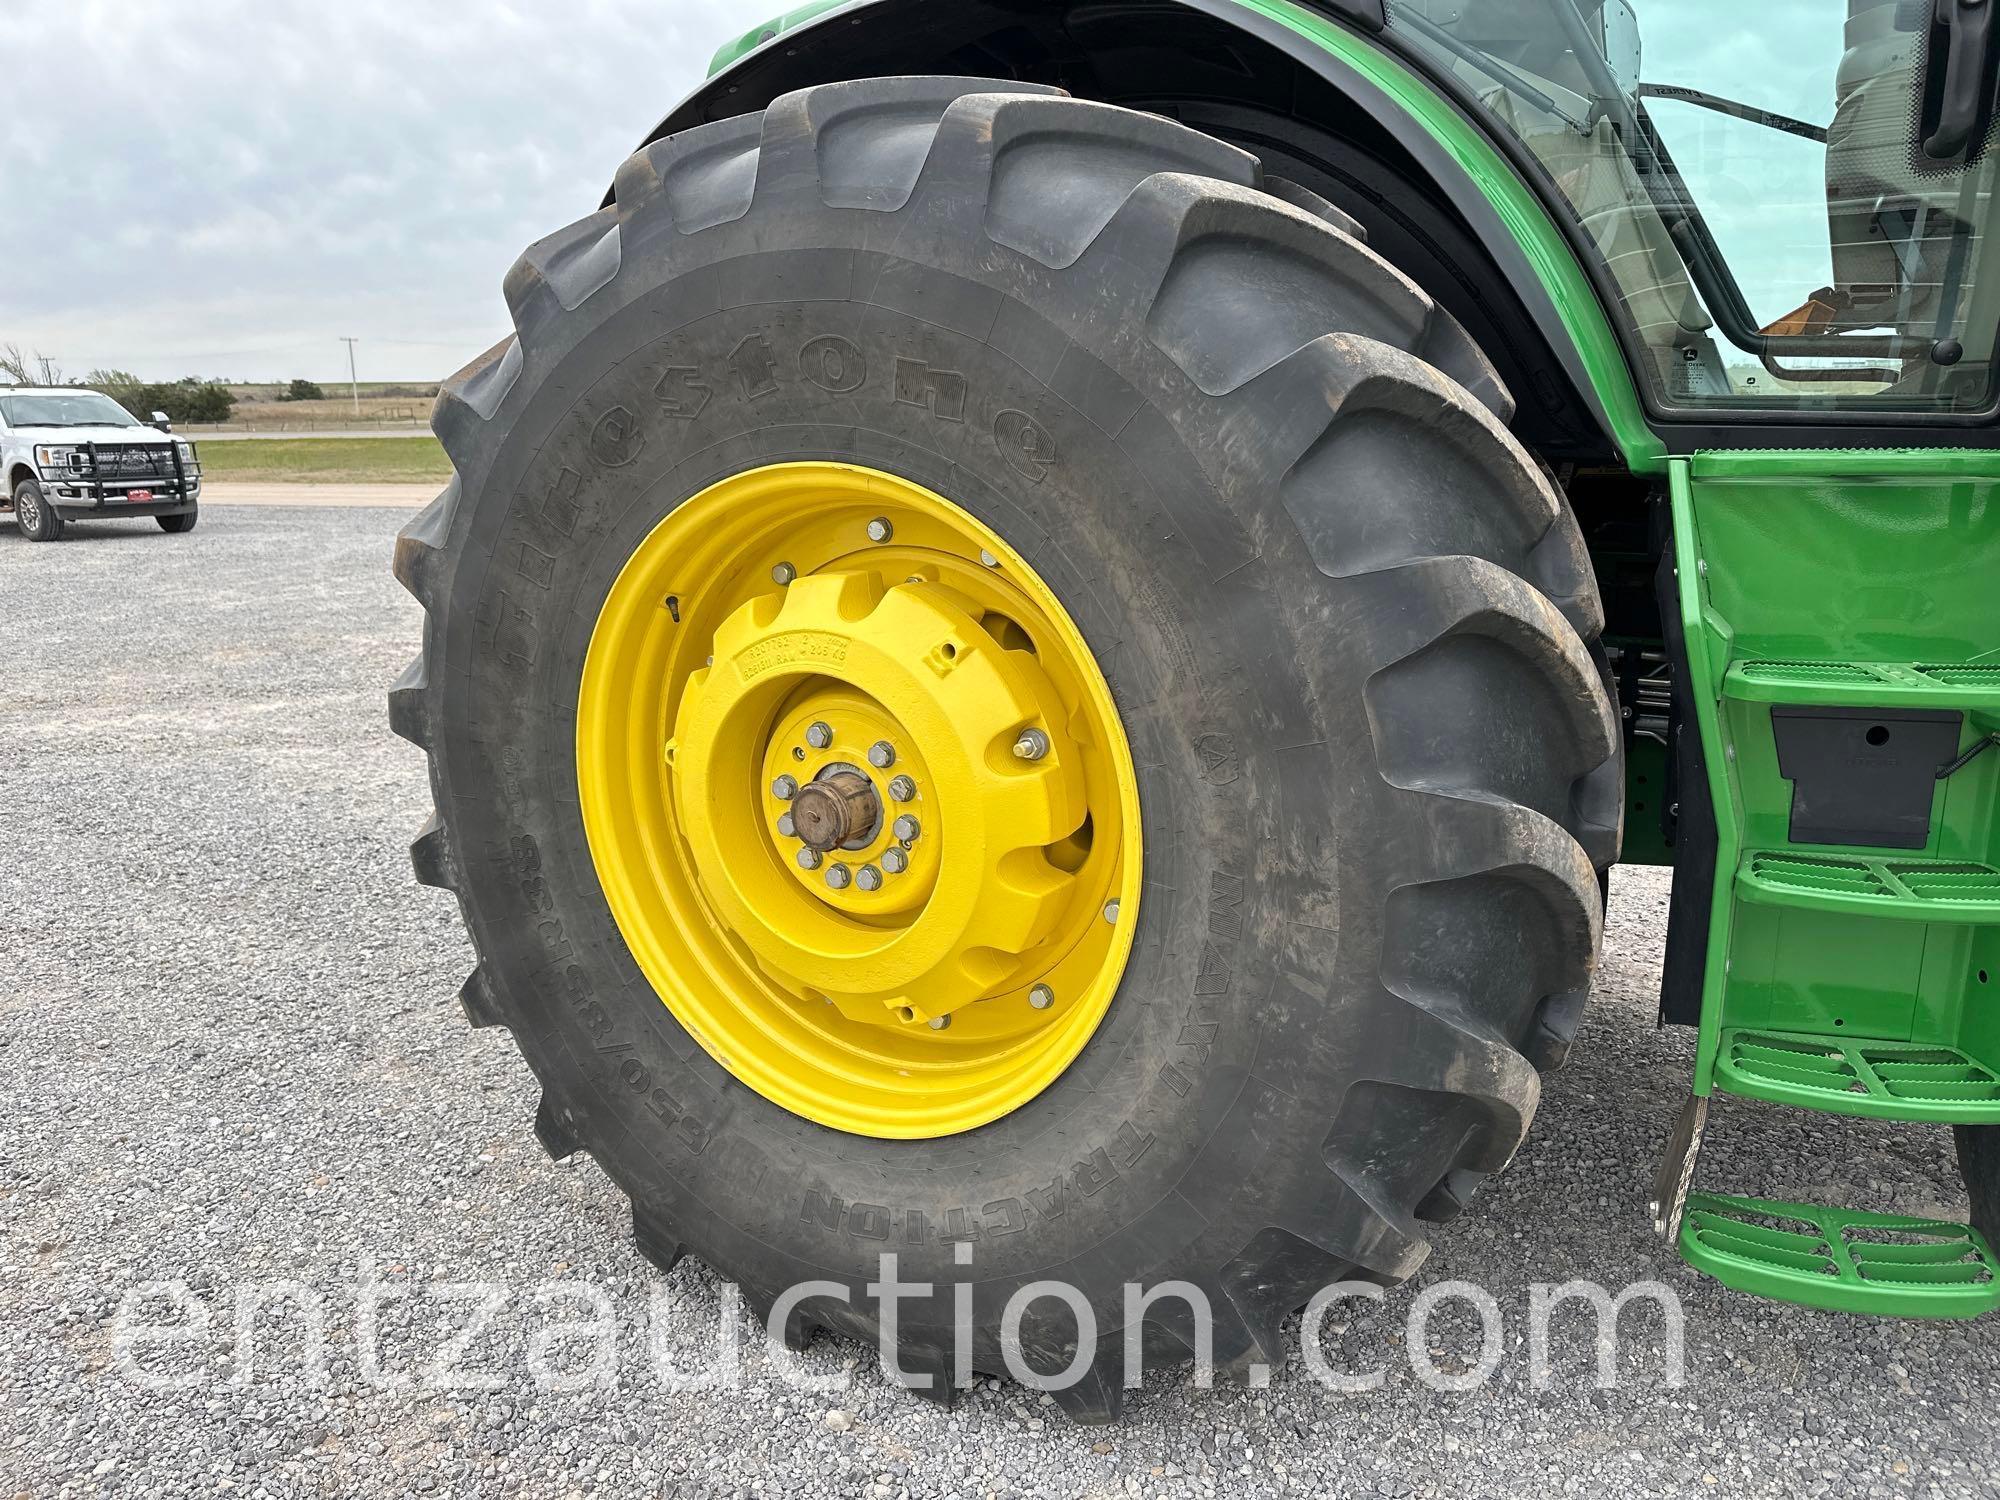 2020 JD 6215R TRACTOR, C&A, FWA, 3PT, PTO, IVT